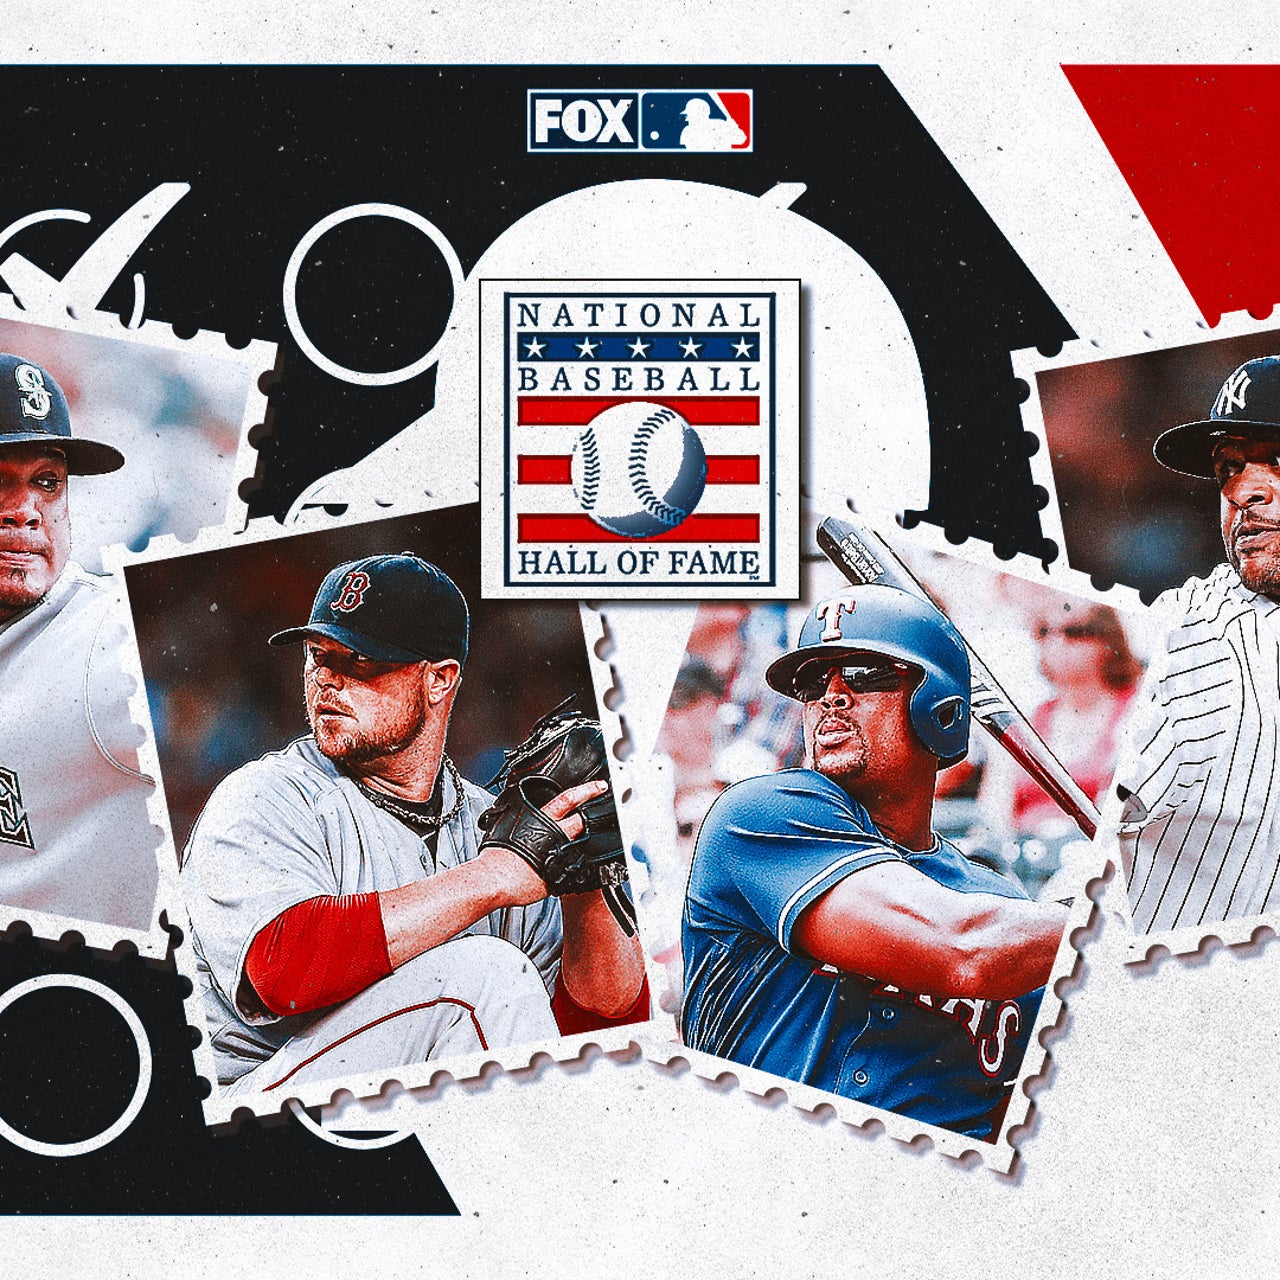 MLB: The one-and-done All-Star team of Baseball Hall of Fame